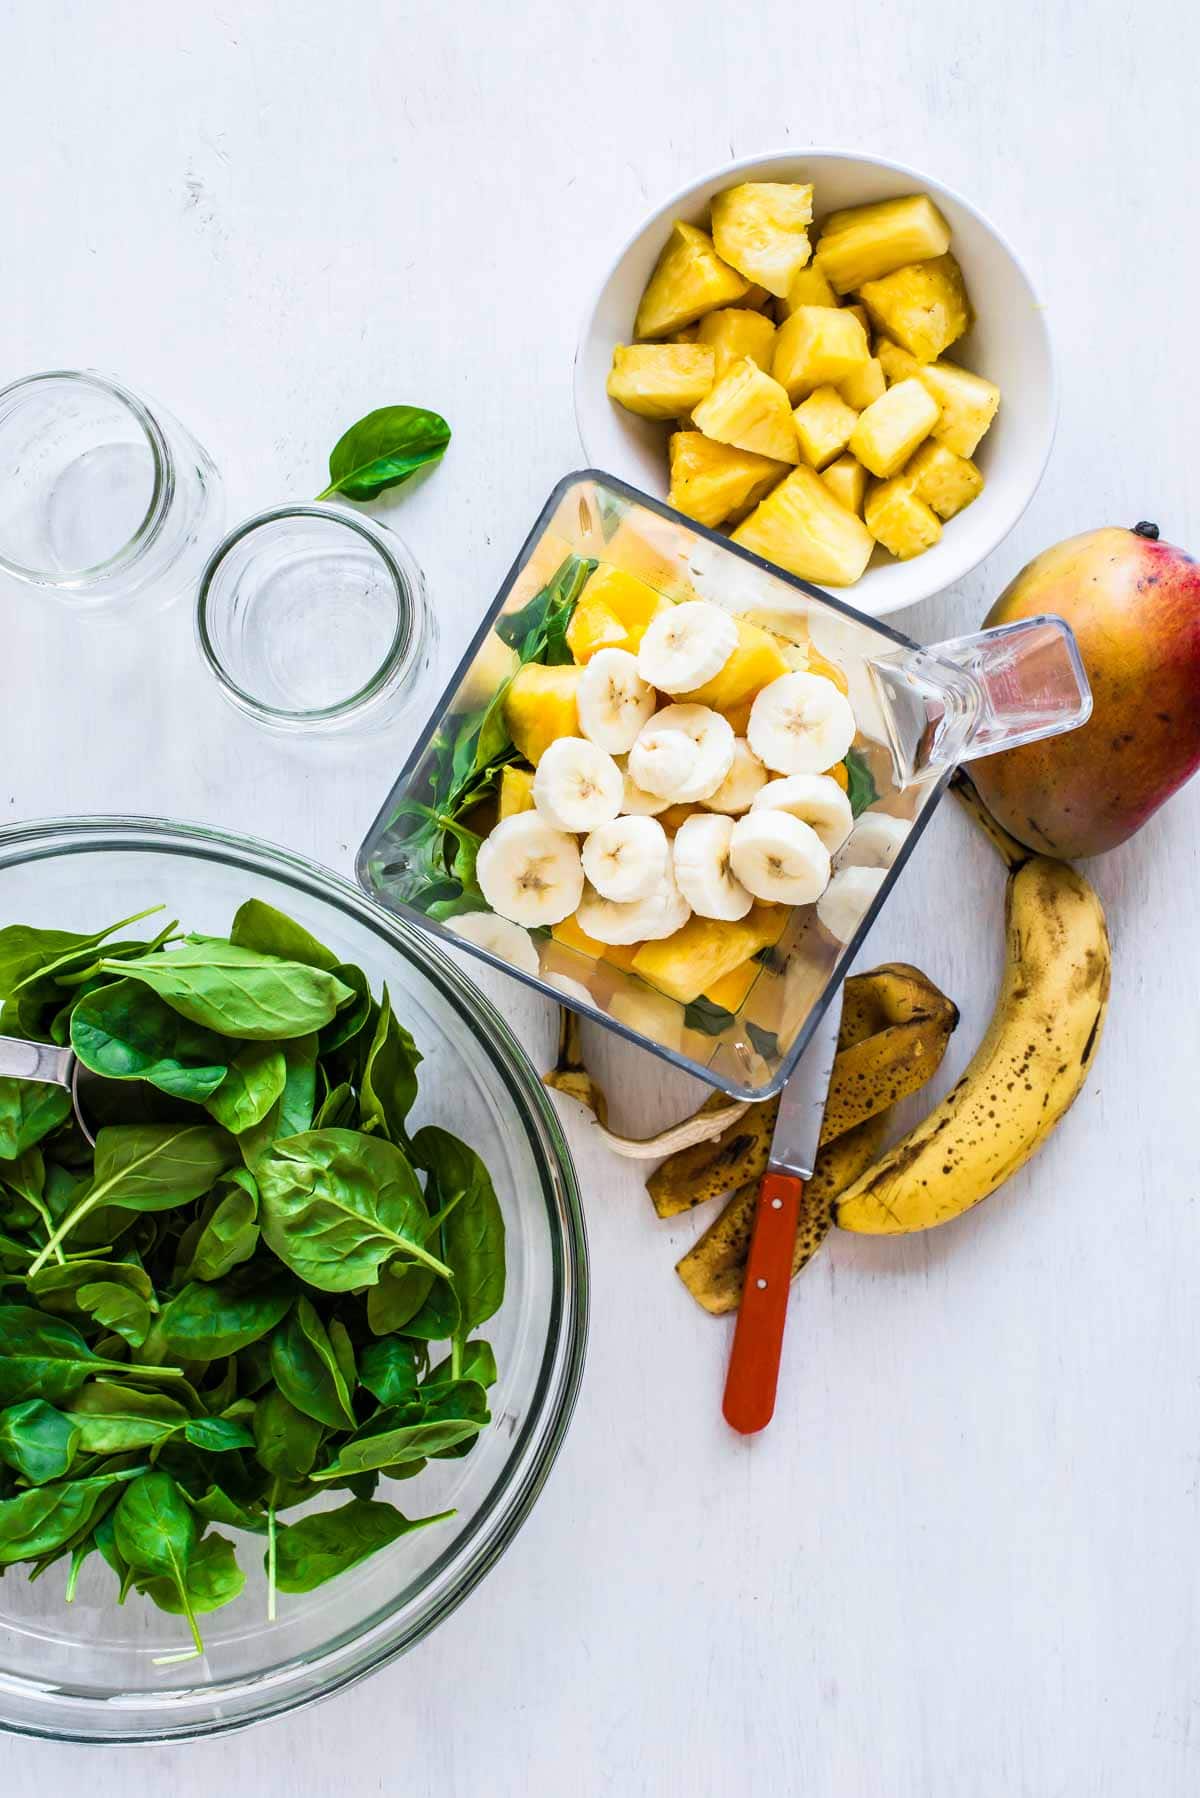 freshly cut bananas and pineapple to make a spinach smoothie